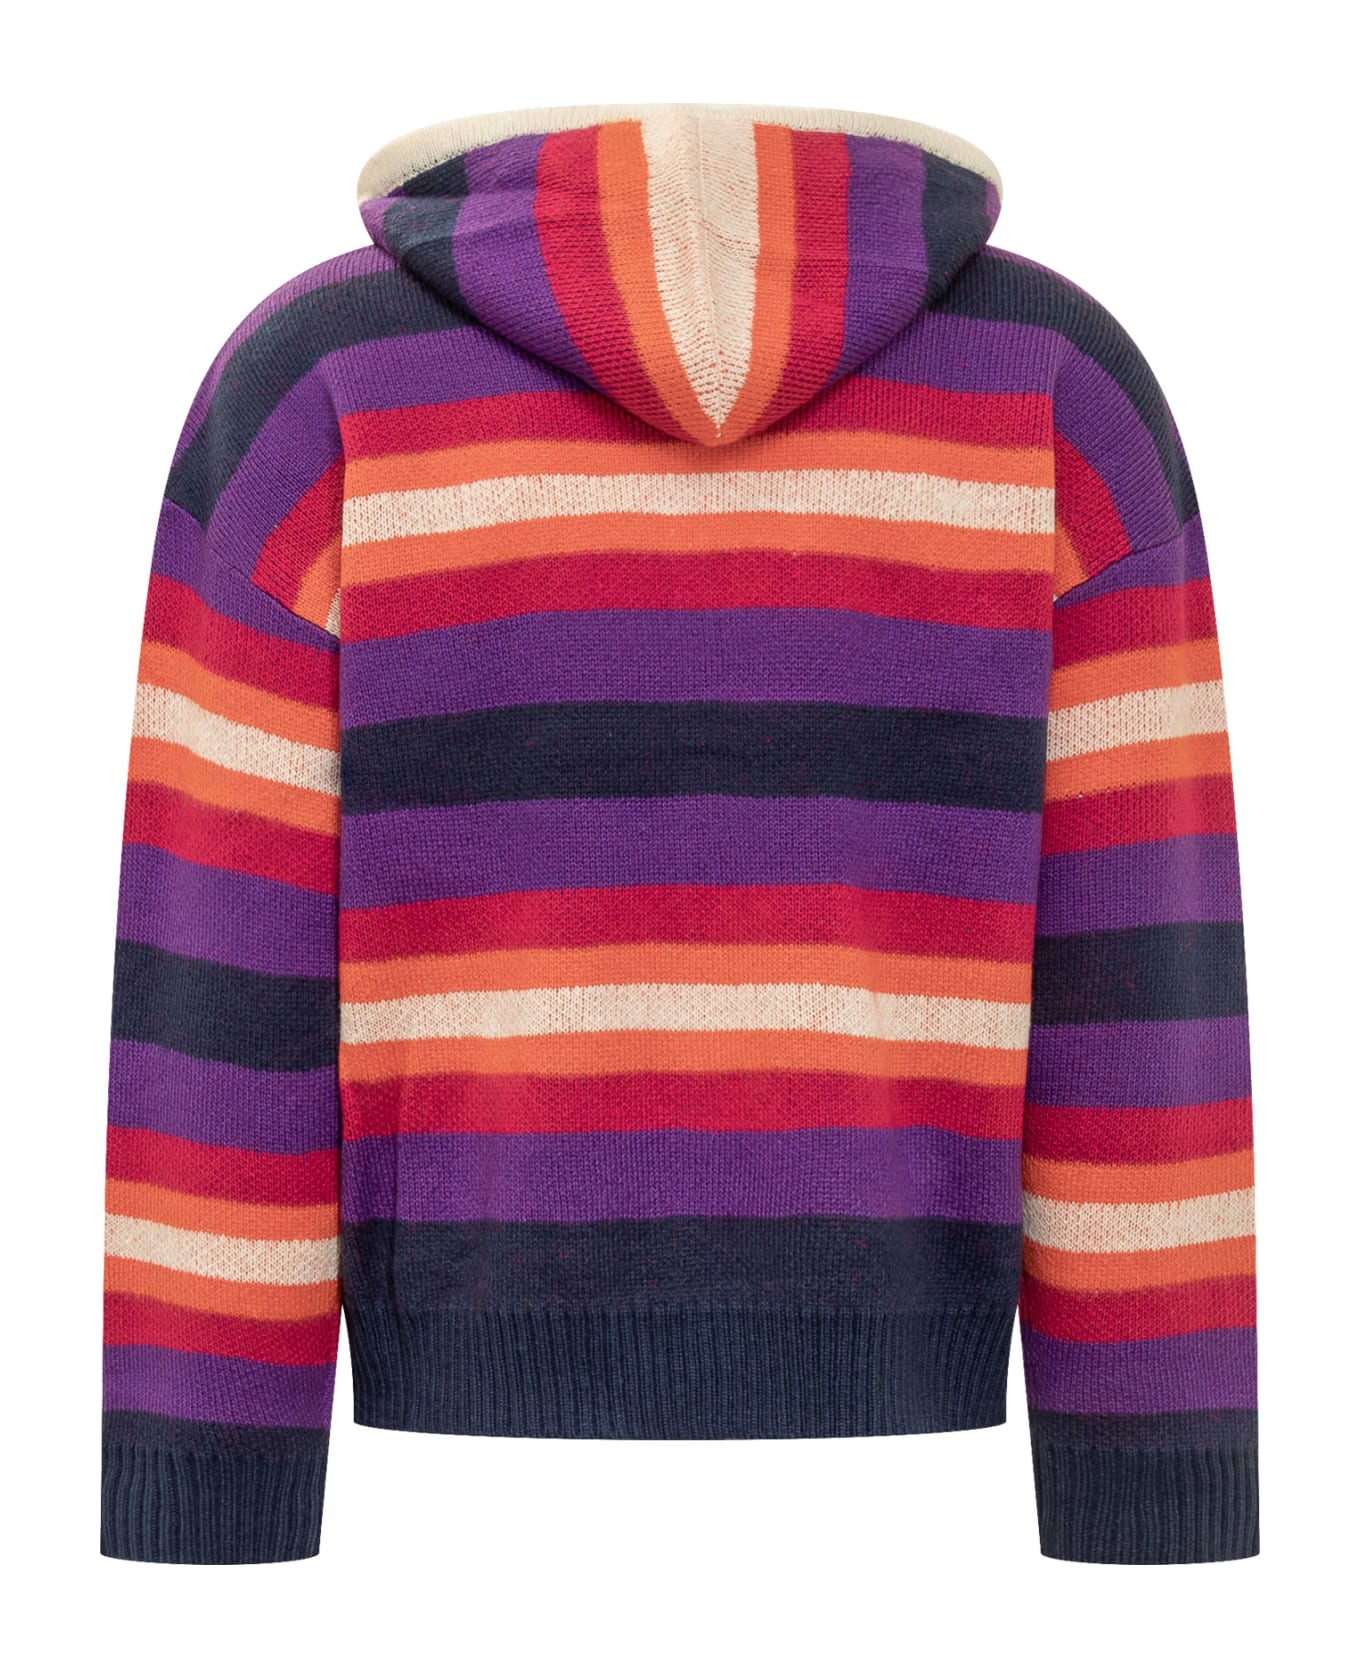 Bluemarble Knitted Sweater - MULTICOLOR STRIPES フリース